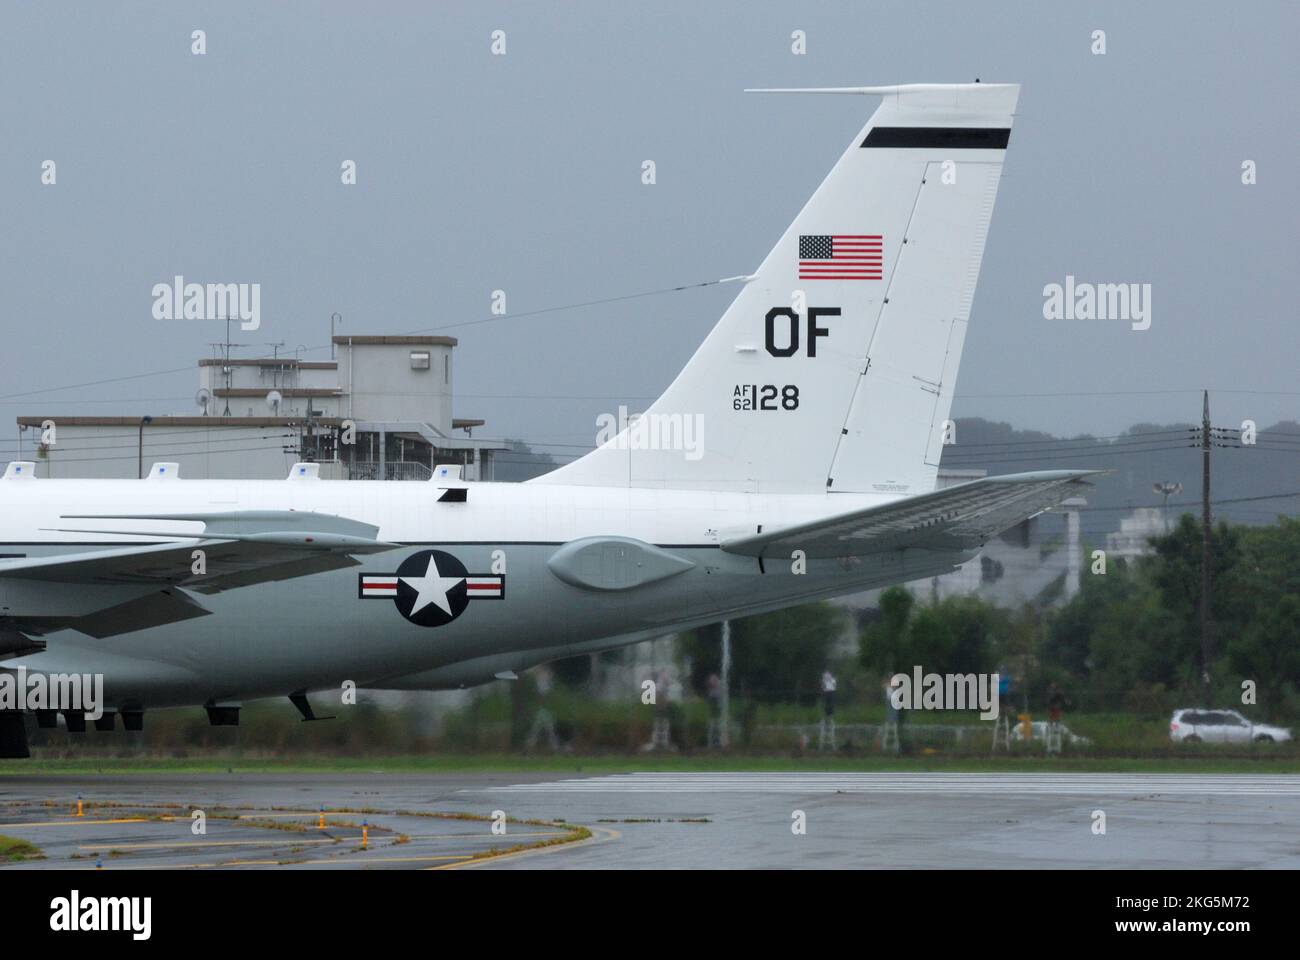 Tokio, Japan - 17. September 2012: United States Air Force Boeing RC-135S Cobra Ball Vertical Fin. Stockfoto